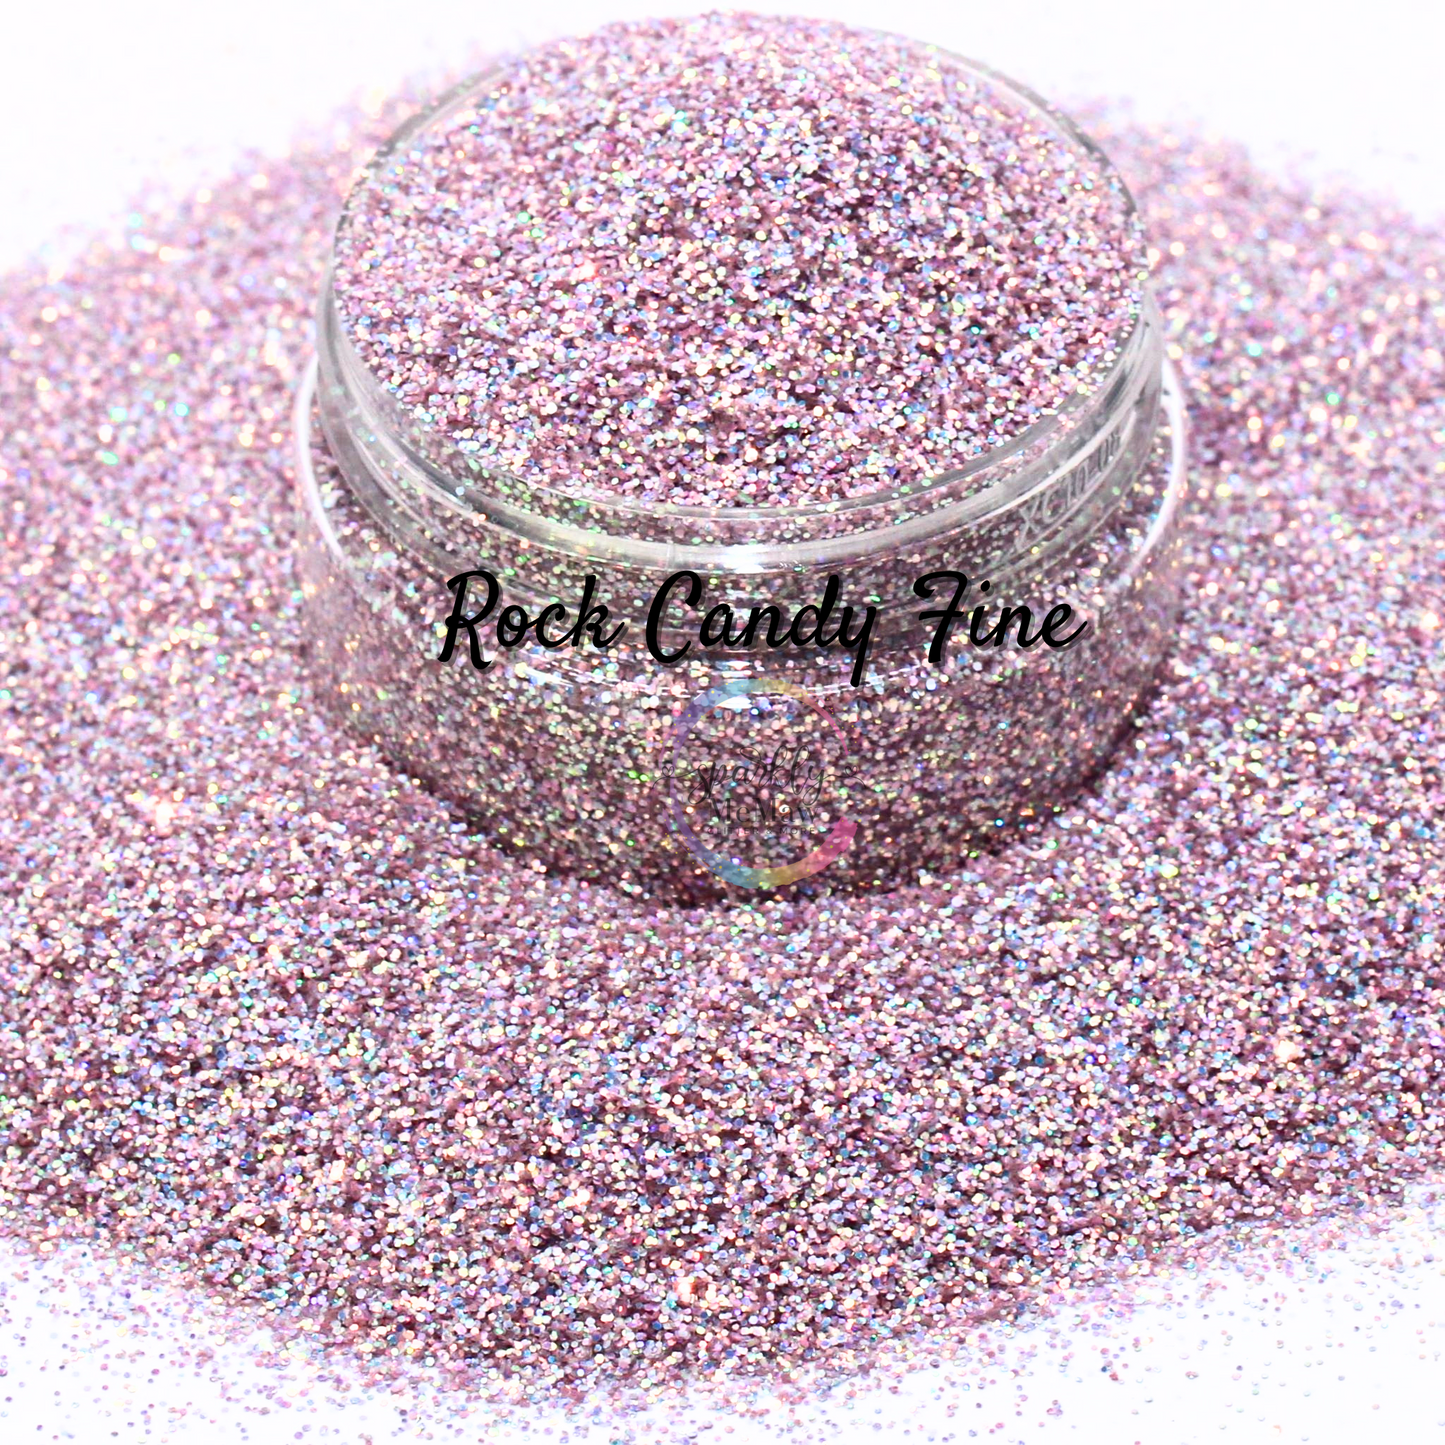 Rock Candy Fine Color Shifting Holographic Glitter Mix